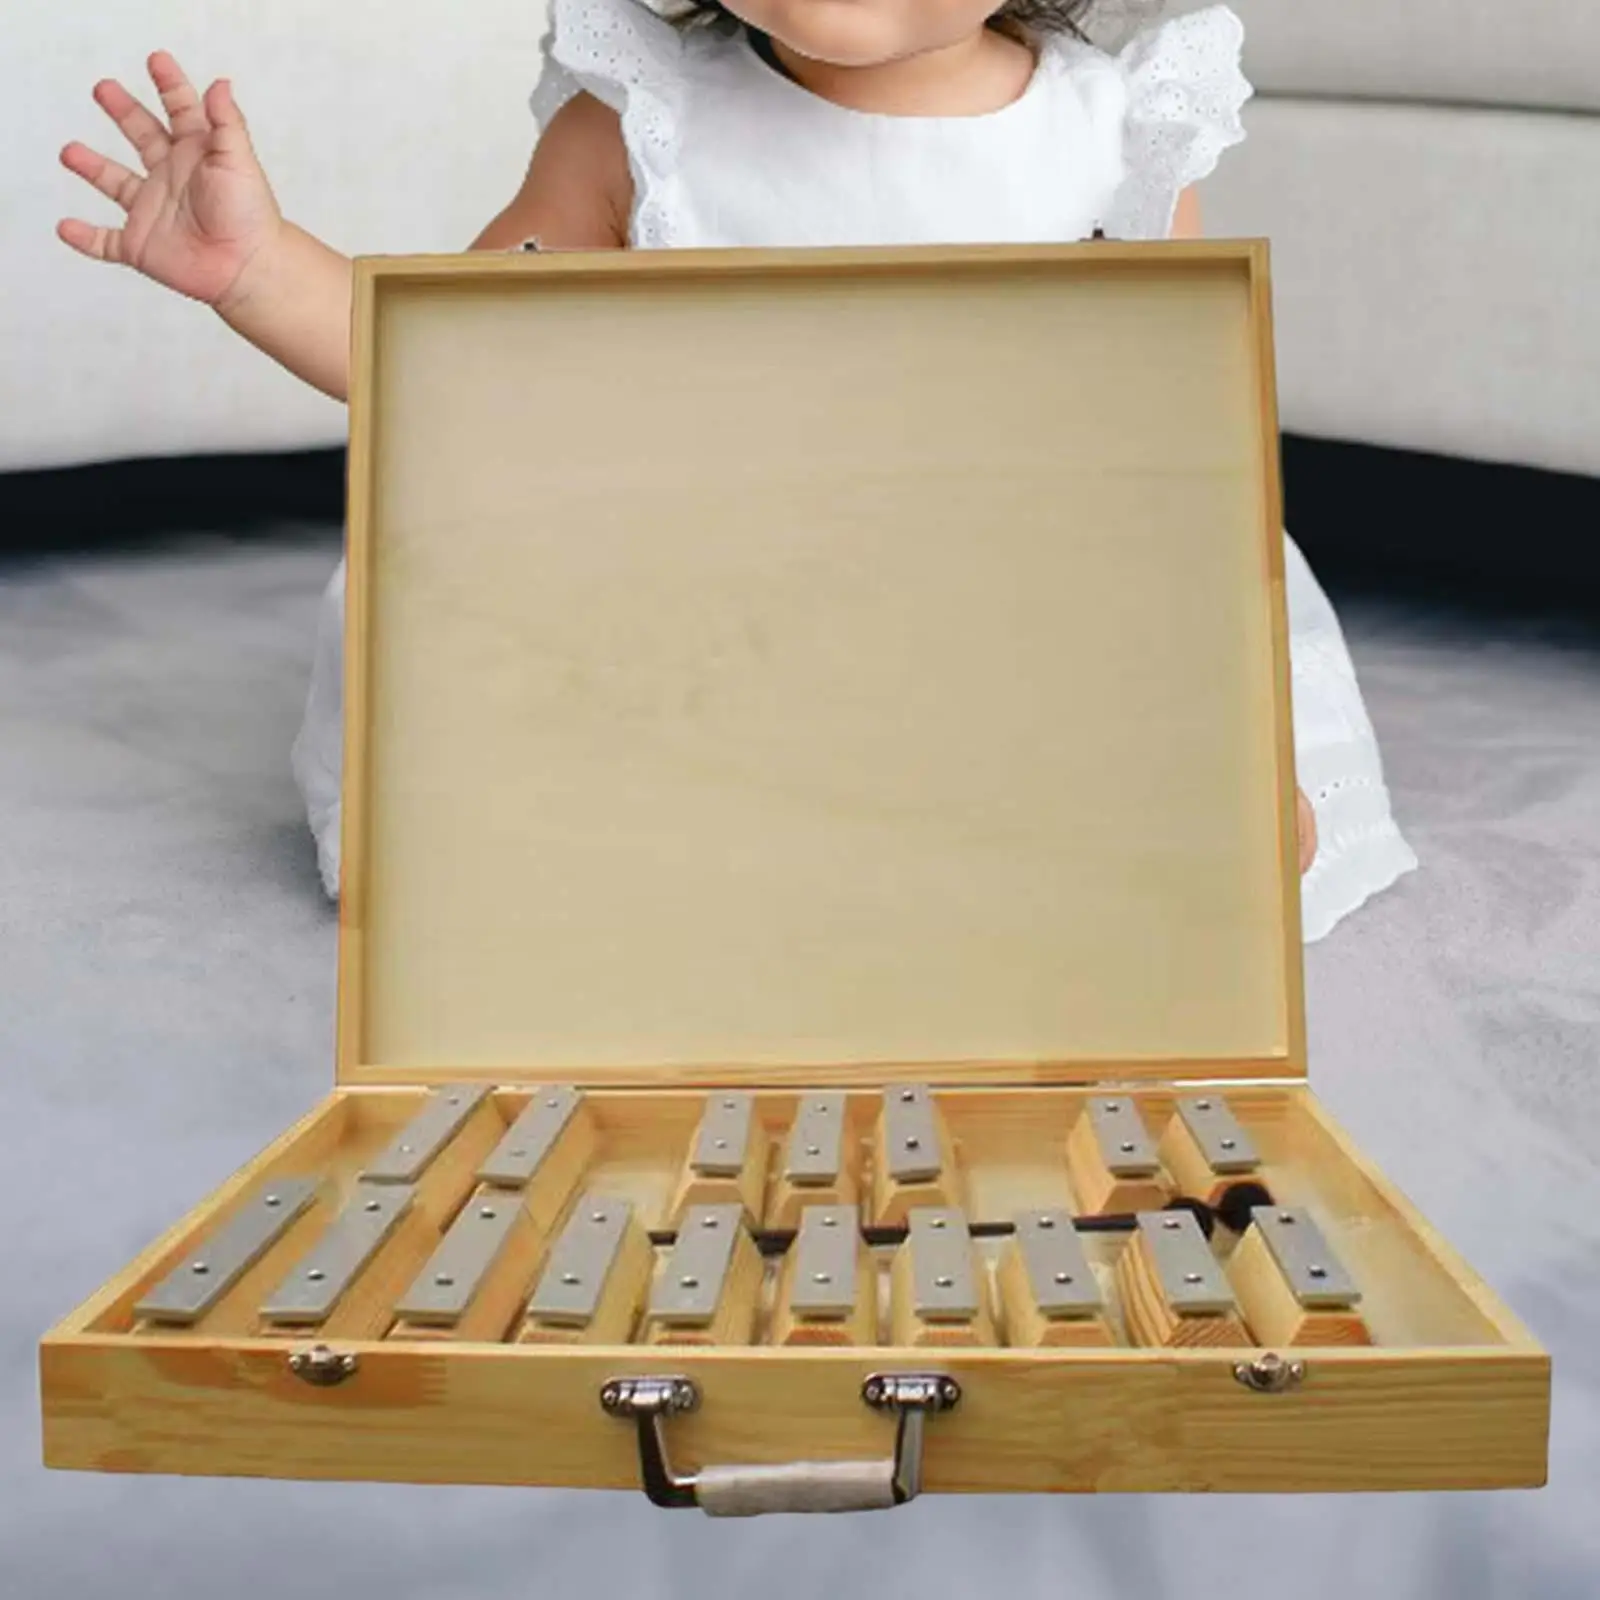 Xylophone for Kids Holiday Birthday Gift for Children Wooden Xylophone Toy